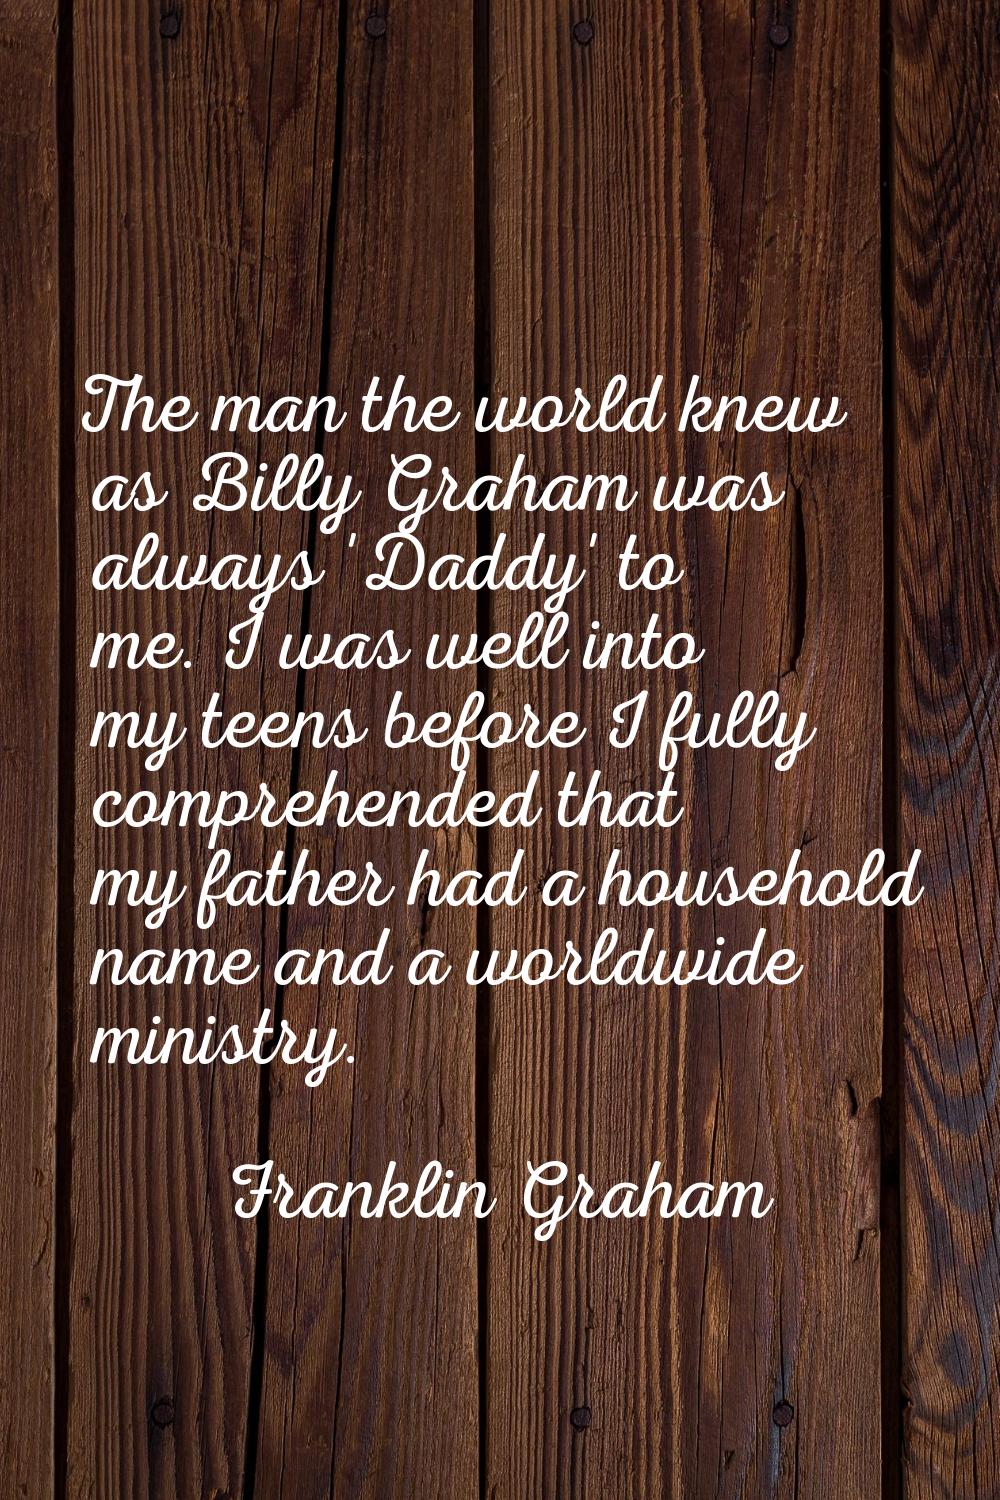 The man the world knew as Billy Graham was always 'Daddy' to me. I was well into my teens before I 